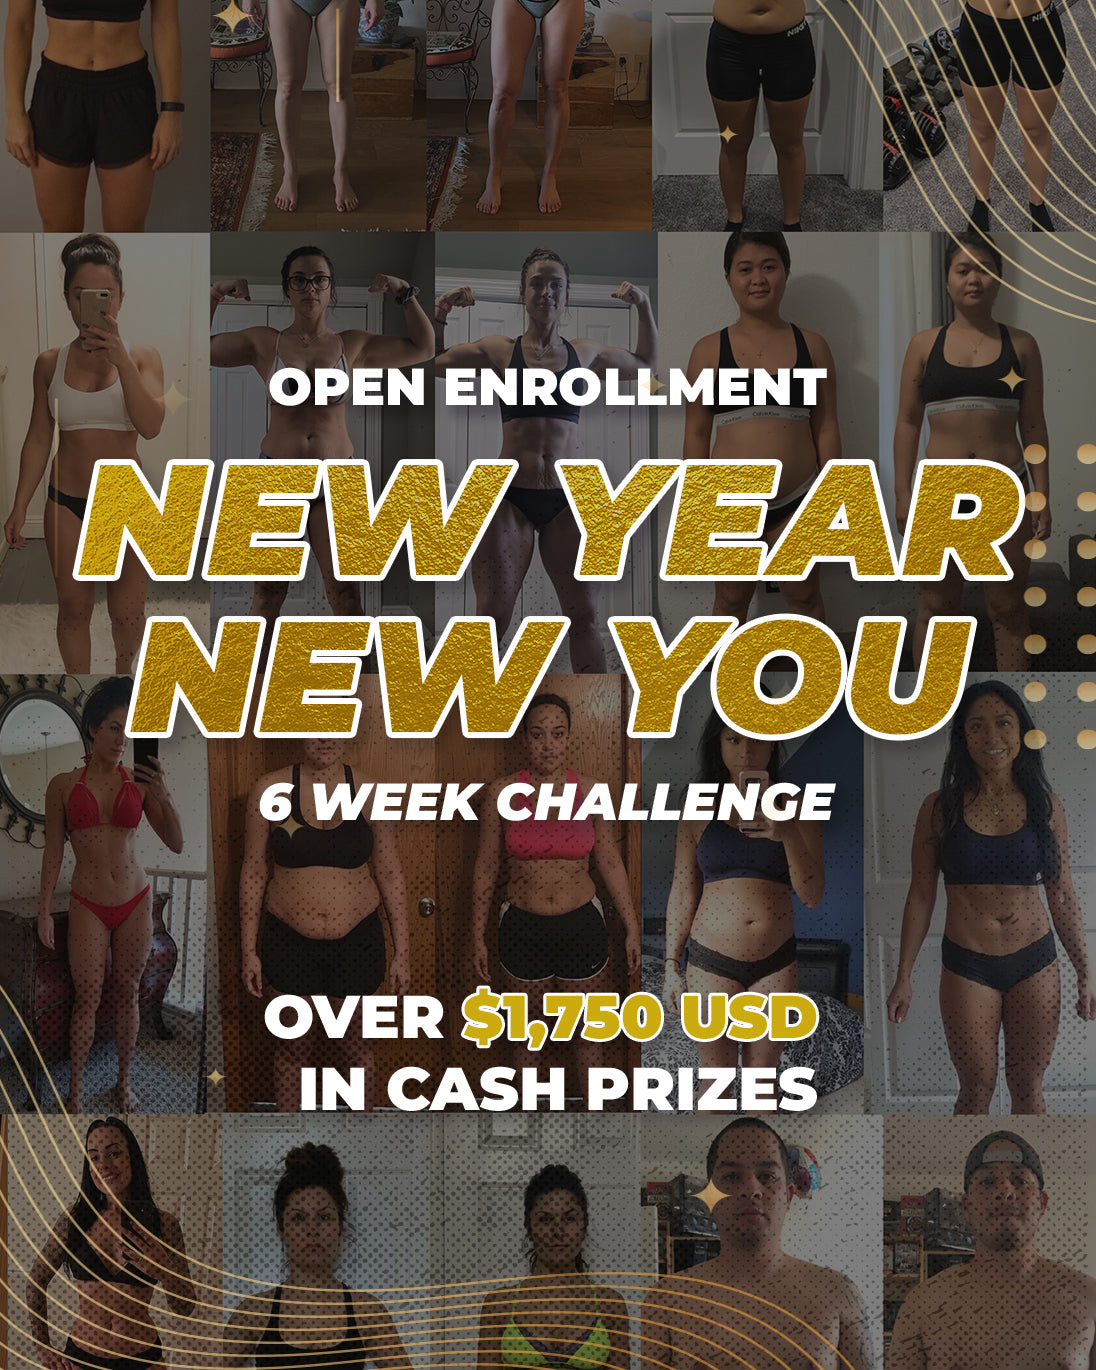 NEW YEAR NEW YOU 6-WEEK CHALLENGE!